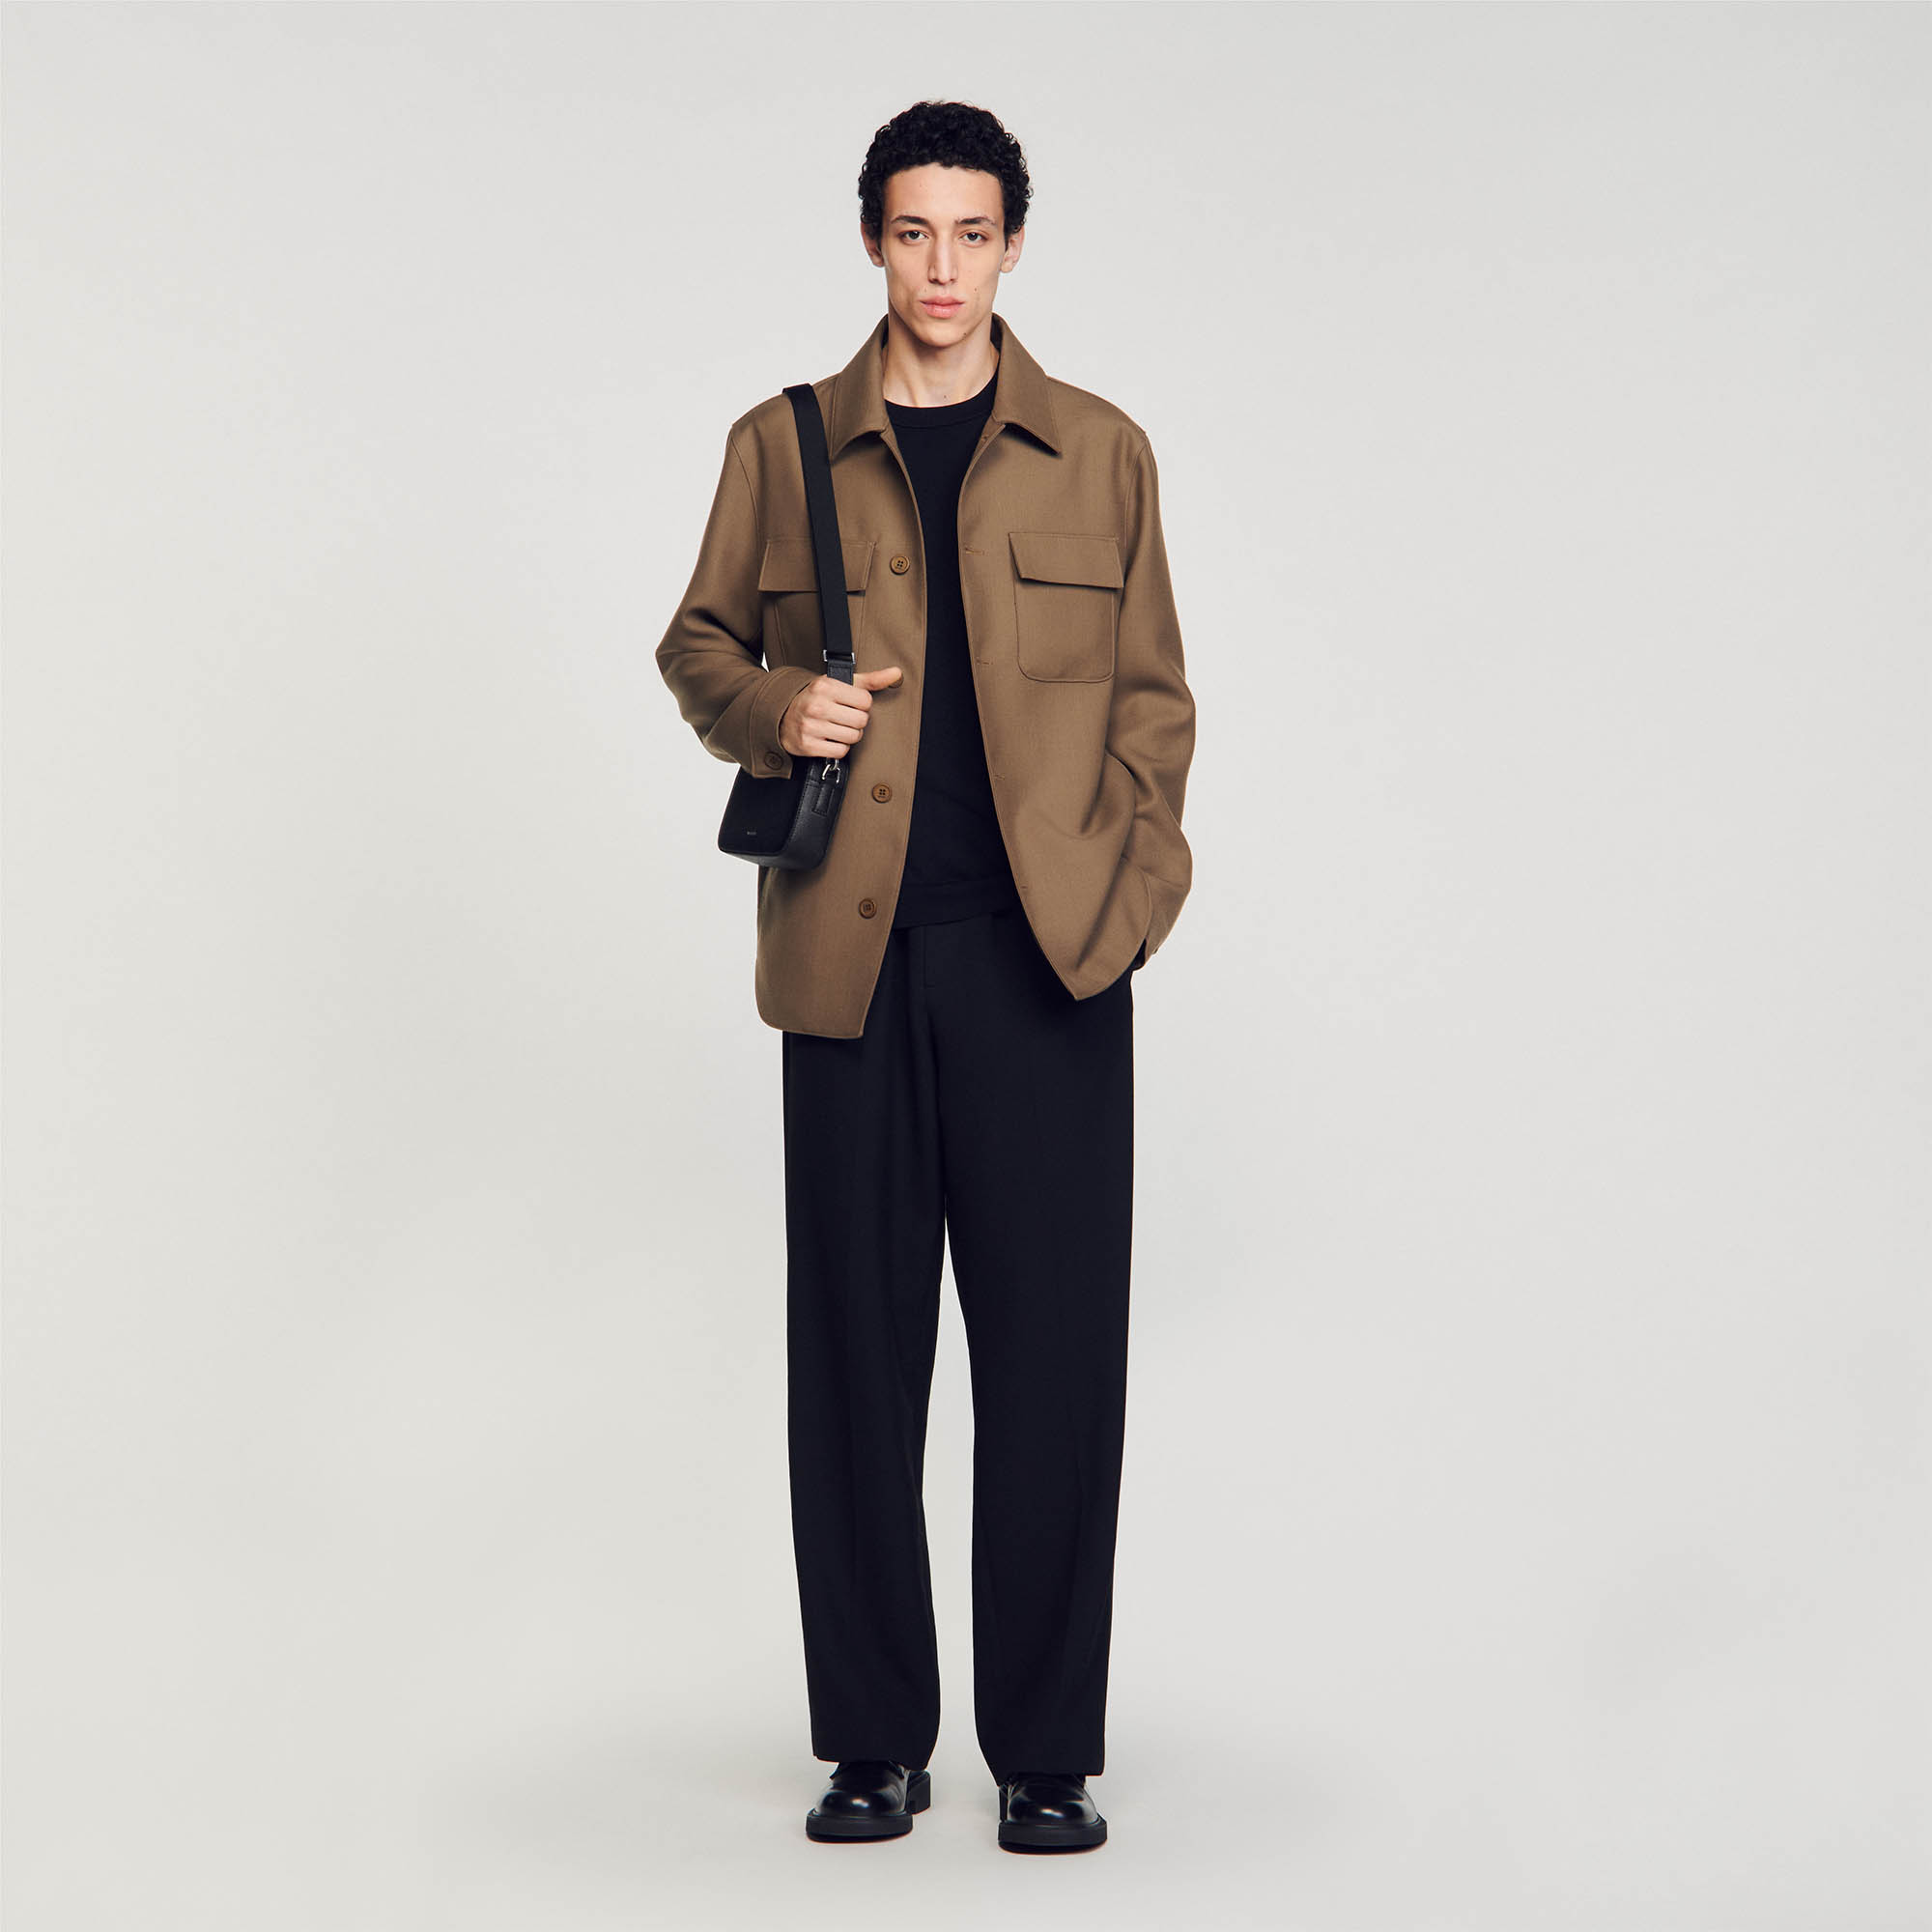 Sandro polyester Long-sleeved overshirt with buttons on the cuffs, a button fastening, and flap pockets on the chest